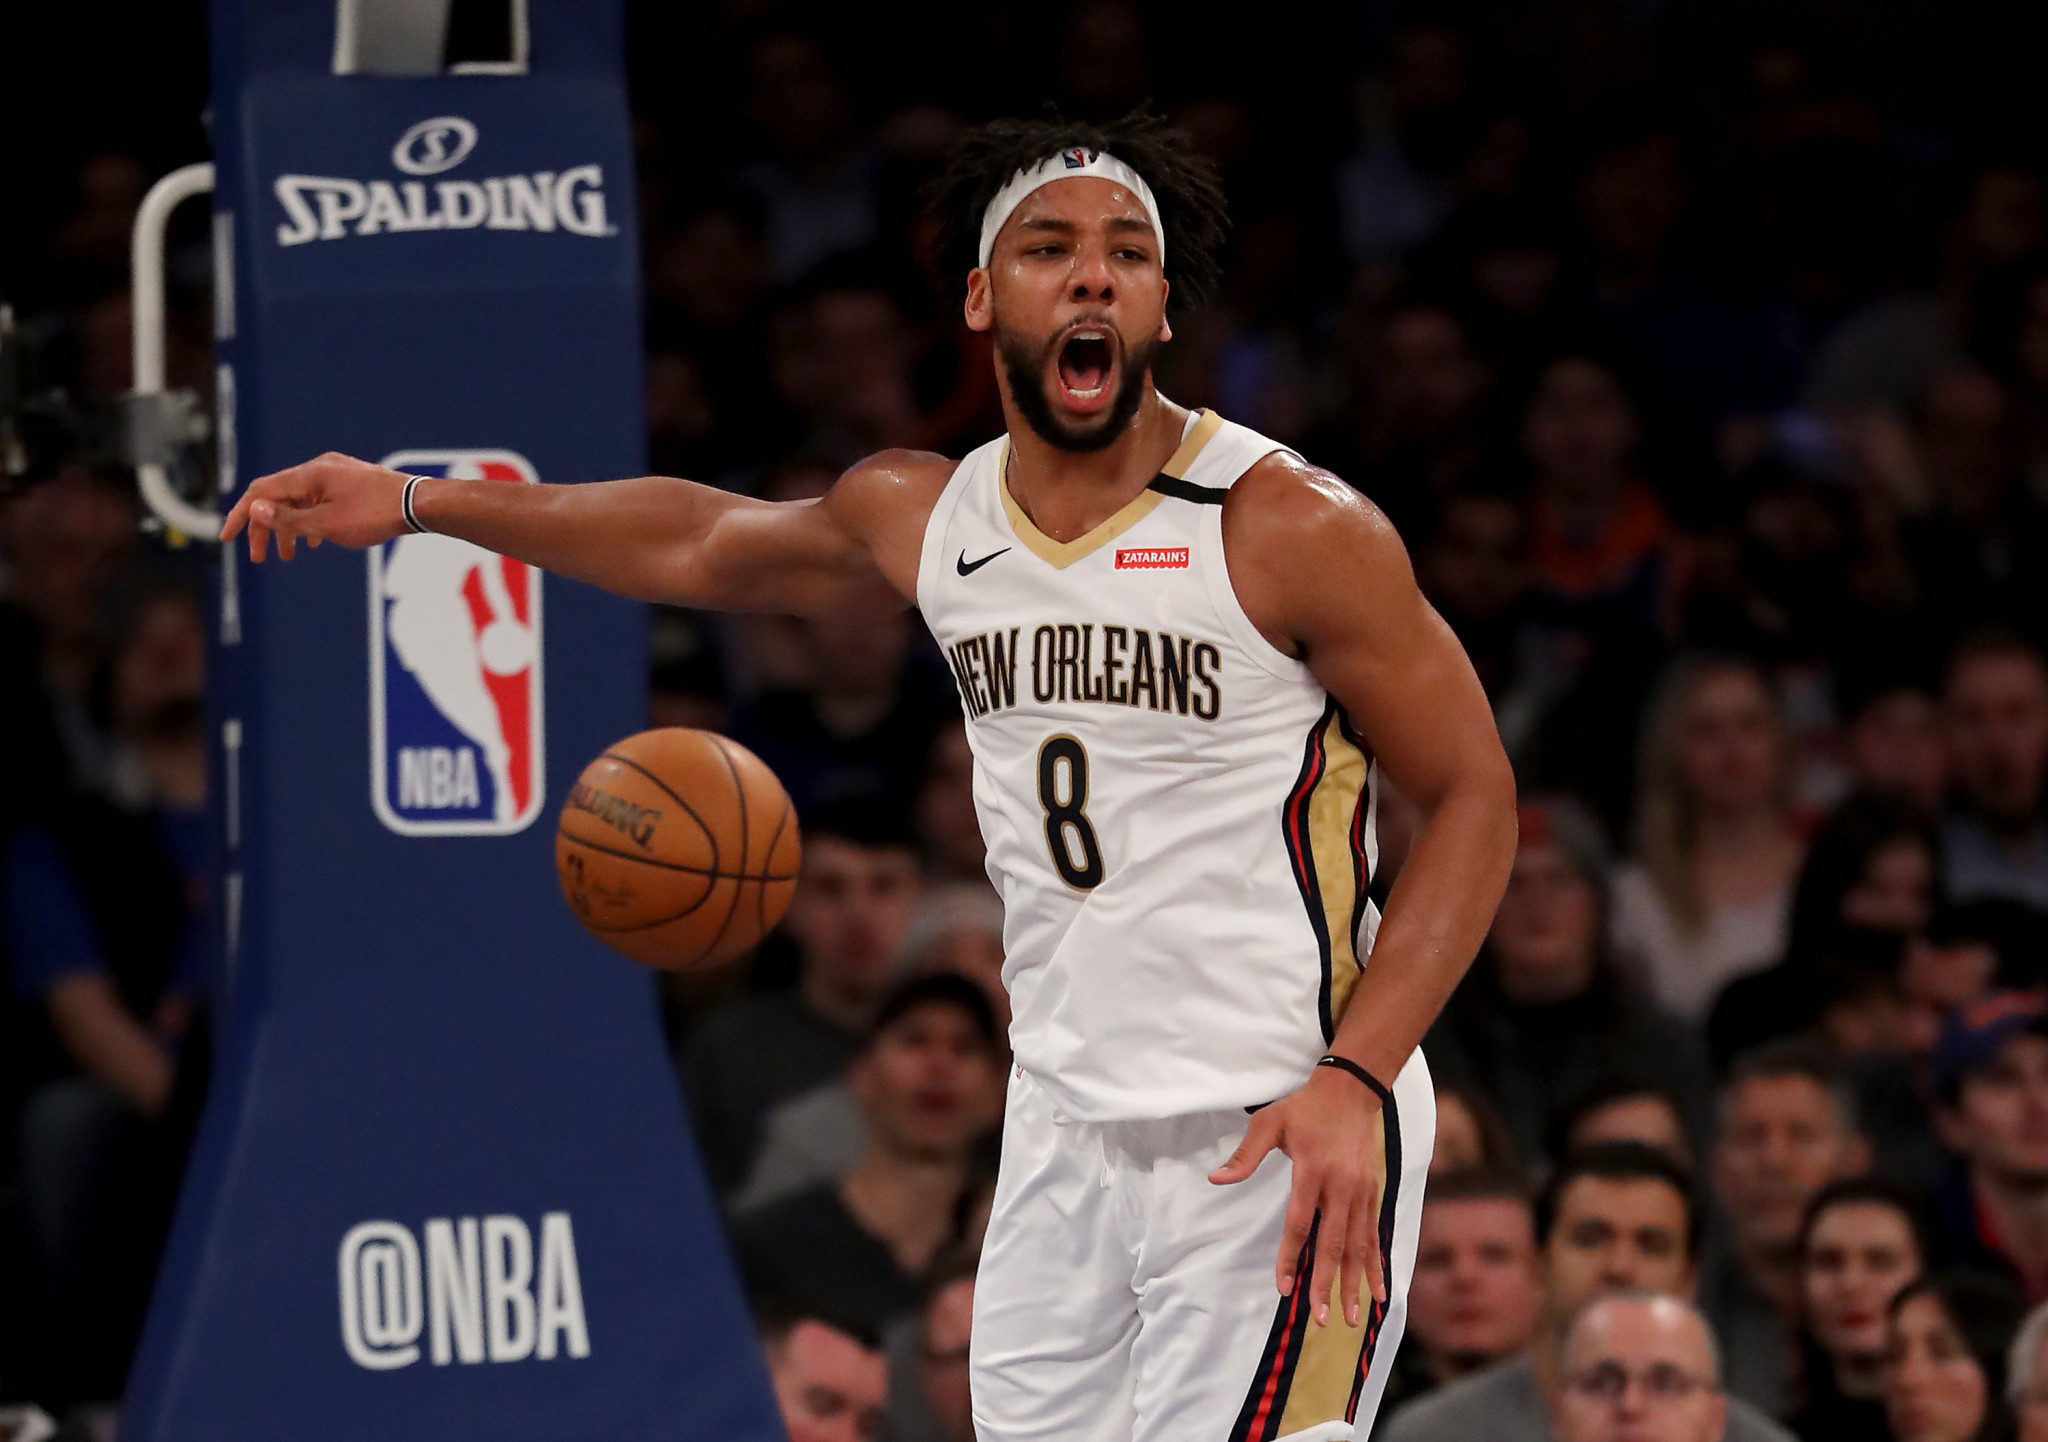 New Orleans Pelicans Jahlil Okafor looks set to be in Nigeria colours come Tokyo 2020 after declaring for the land of his grandfather ©Getty Images